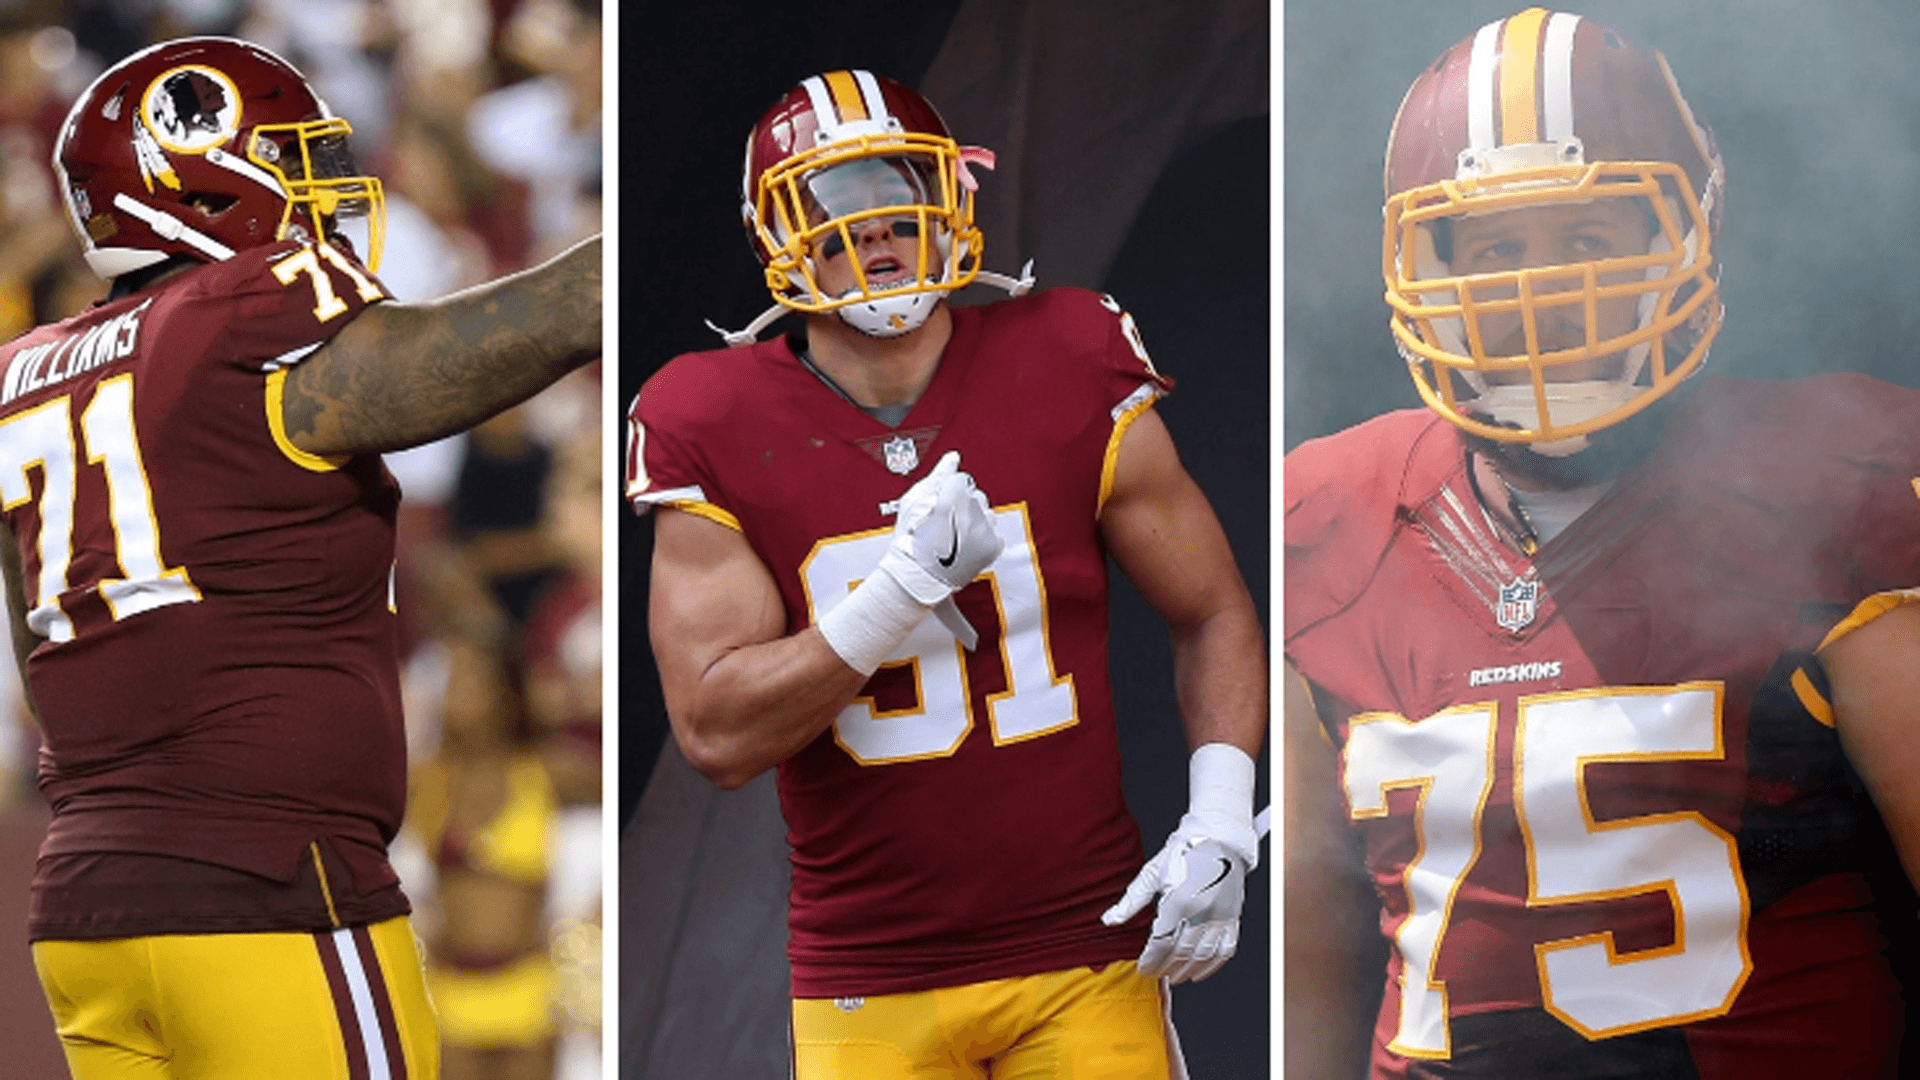 Three Redskins named to 2018 Pro Bowl roster, two tabbed as